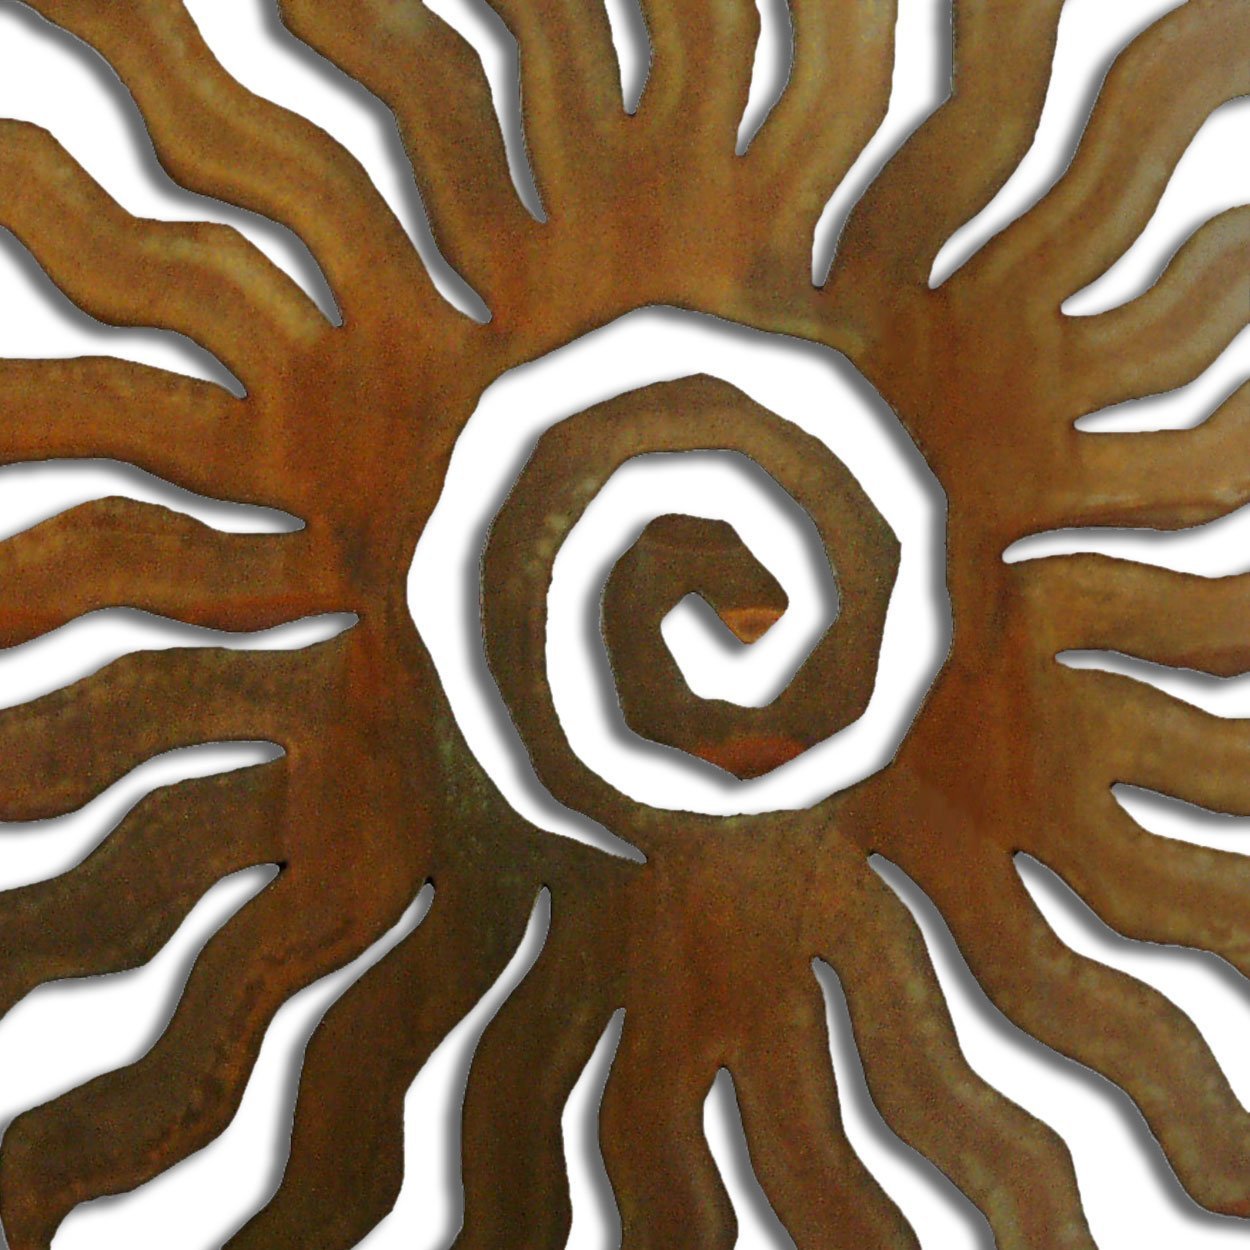 165164 - 30-inch extra large 24-Ray Sunburst 3D Metal Wall Art in a rich rust finish